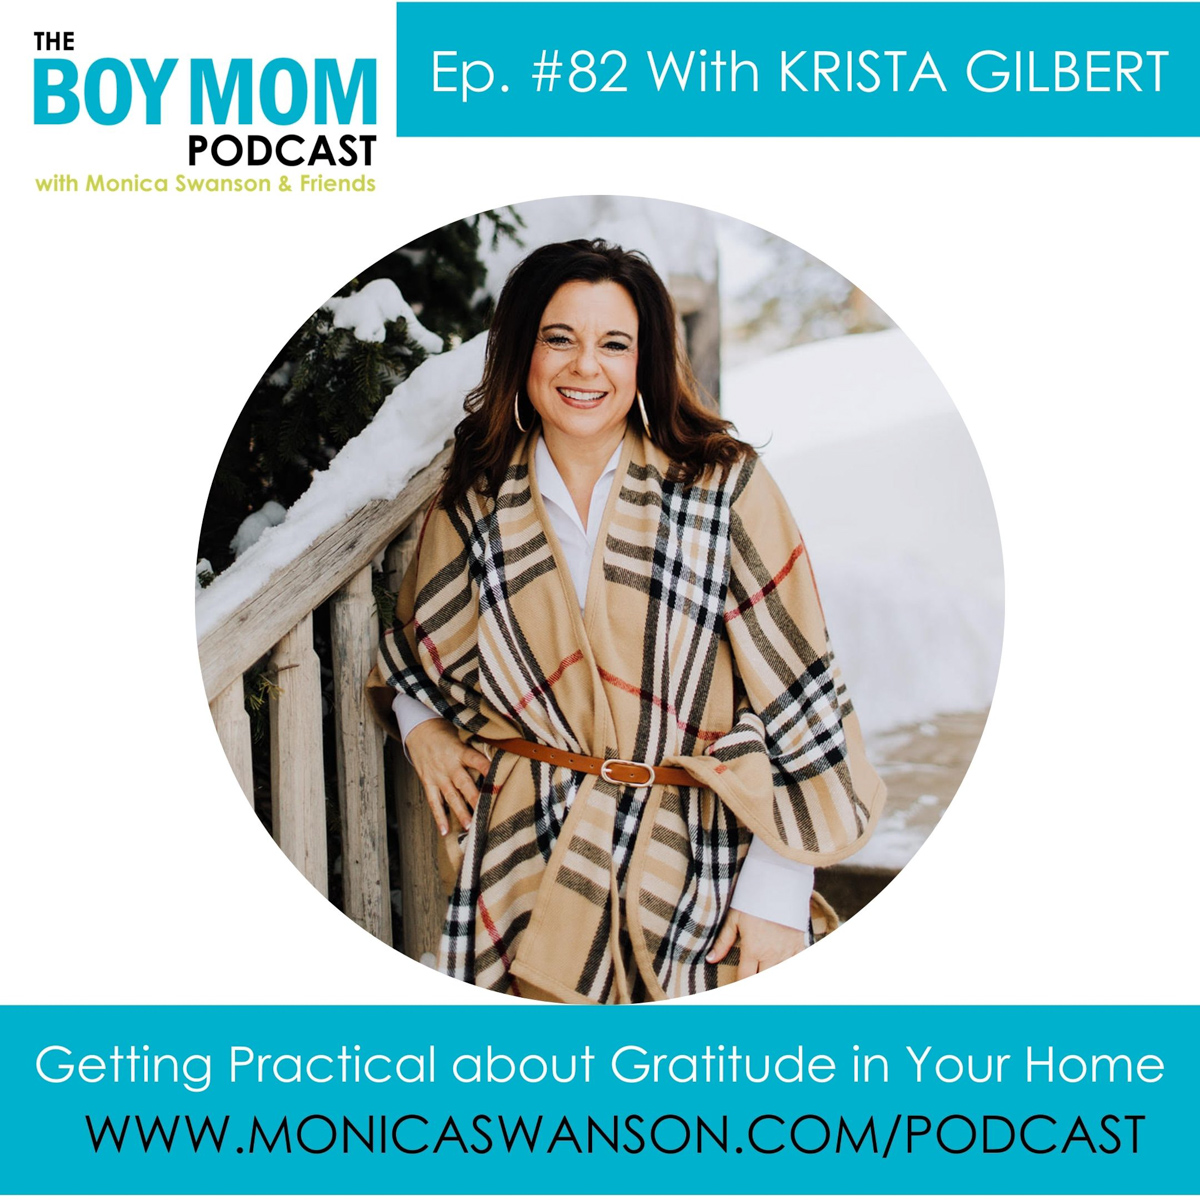 Getting Practical about Gratitude in Your Home {Episode 82 with Krista Gilbert}